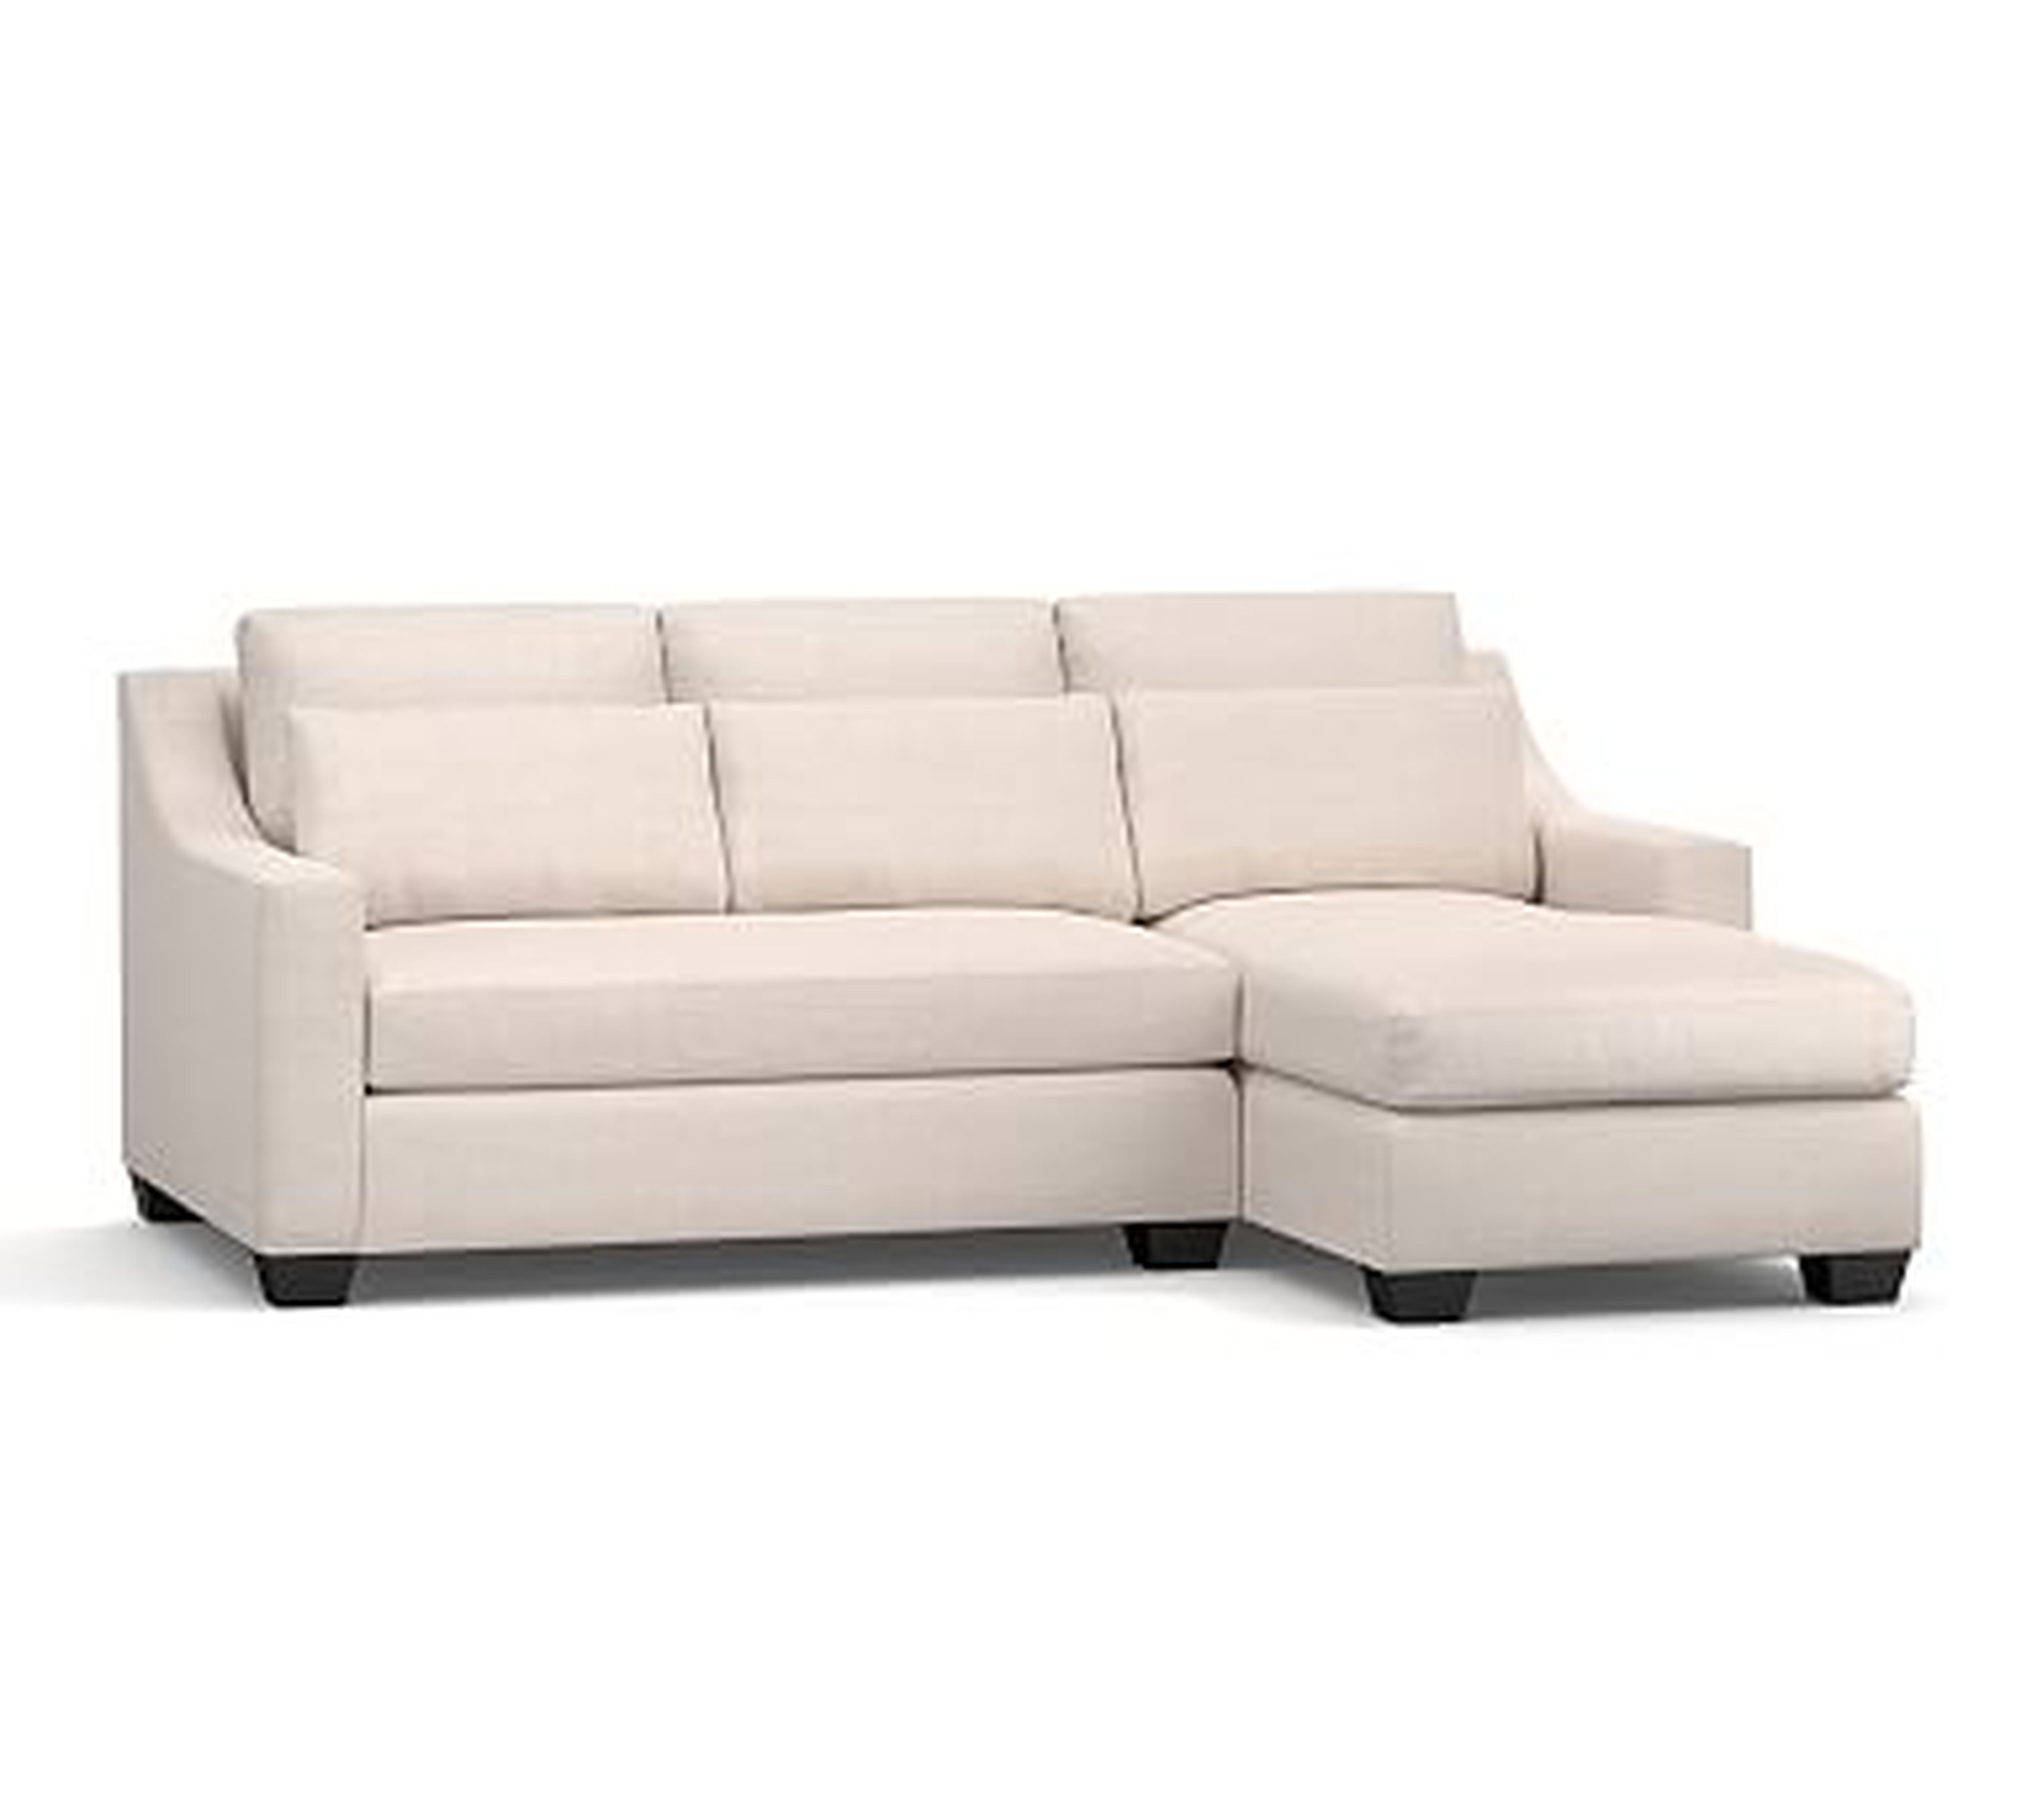 York Slope Arm Upholstered Deep Seat Left Arm Loveseat with Chaise Sectional and Bench Cushion, Down Blend Wrapped Cushions, Sunbrella(R) Performance Slub Tweed White - Pottery Barn